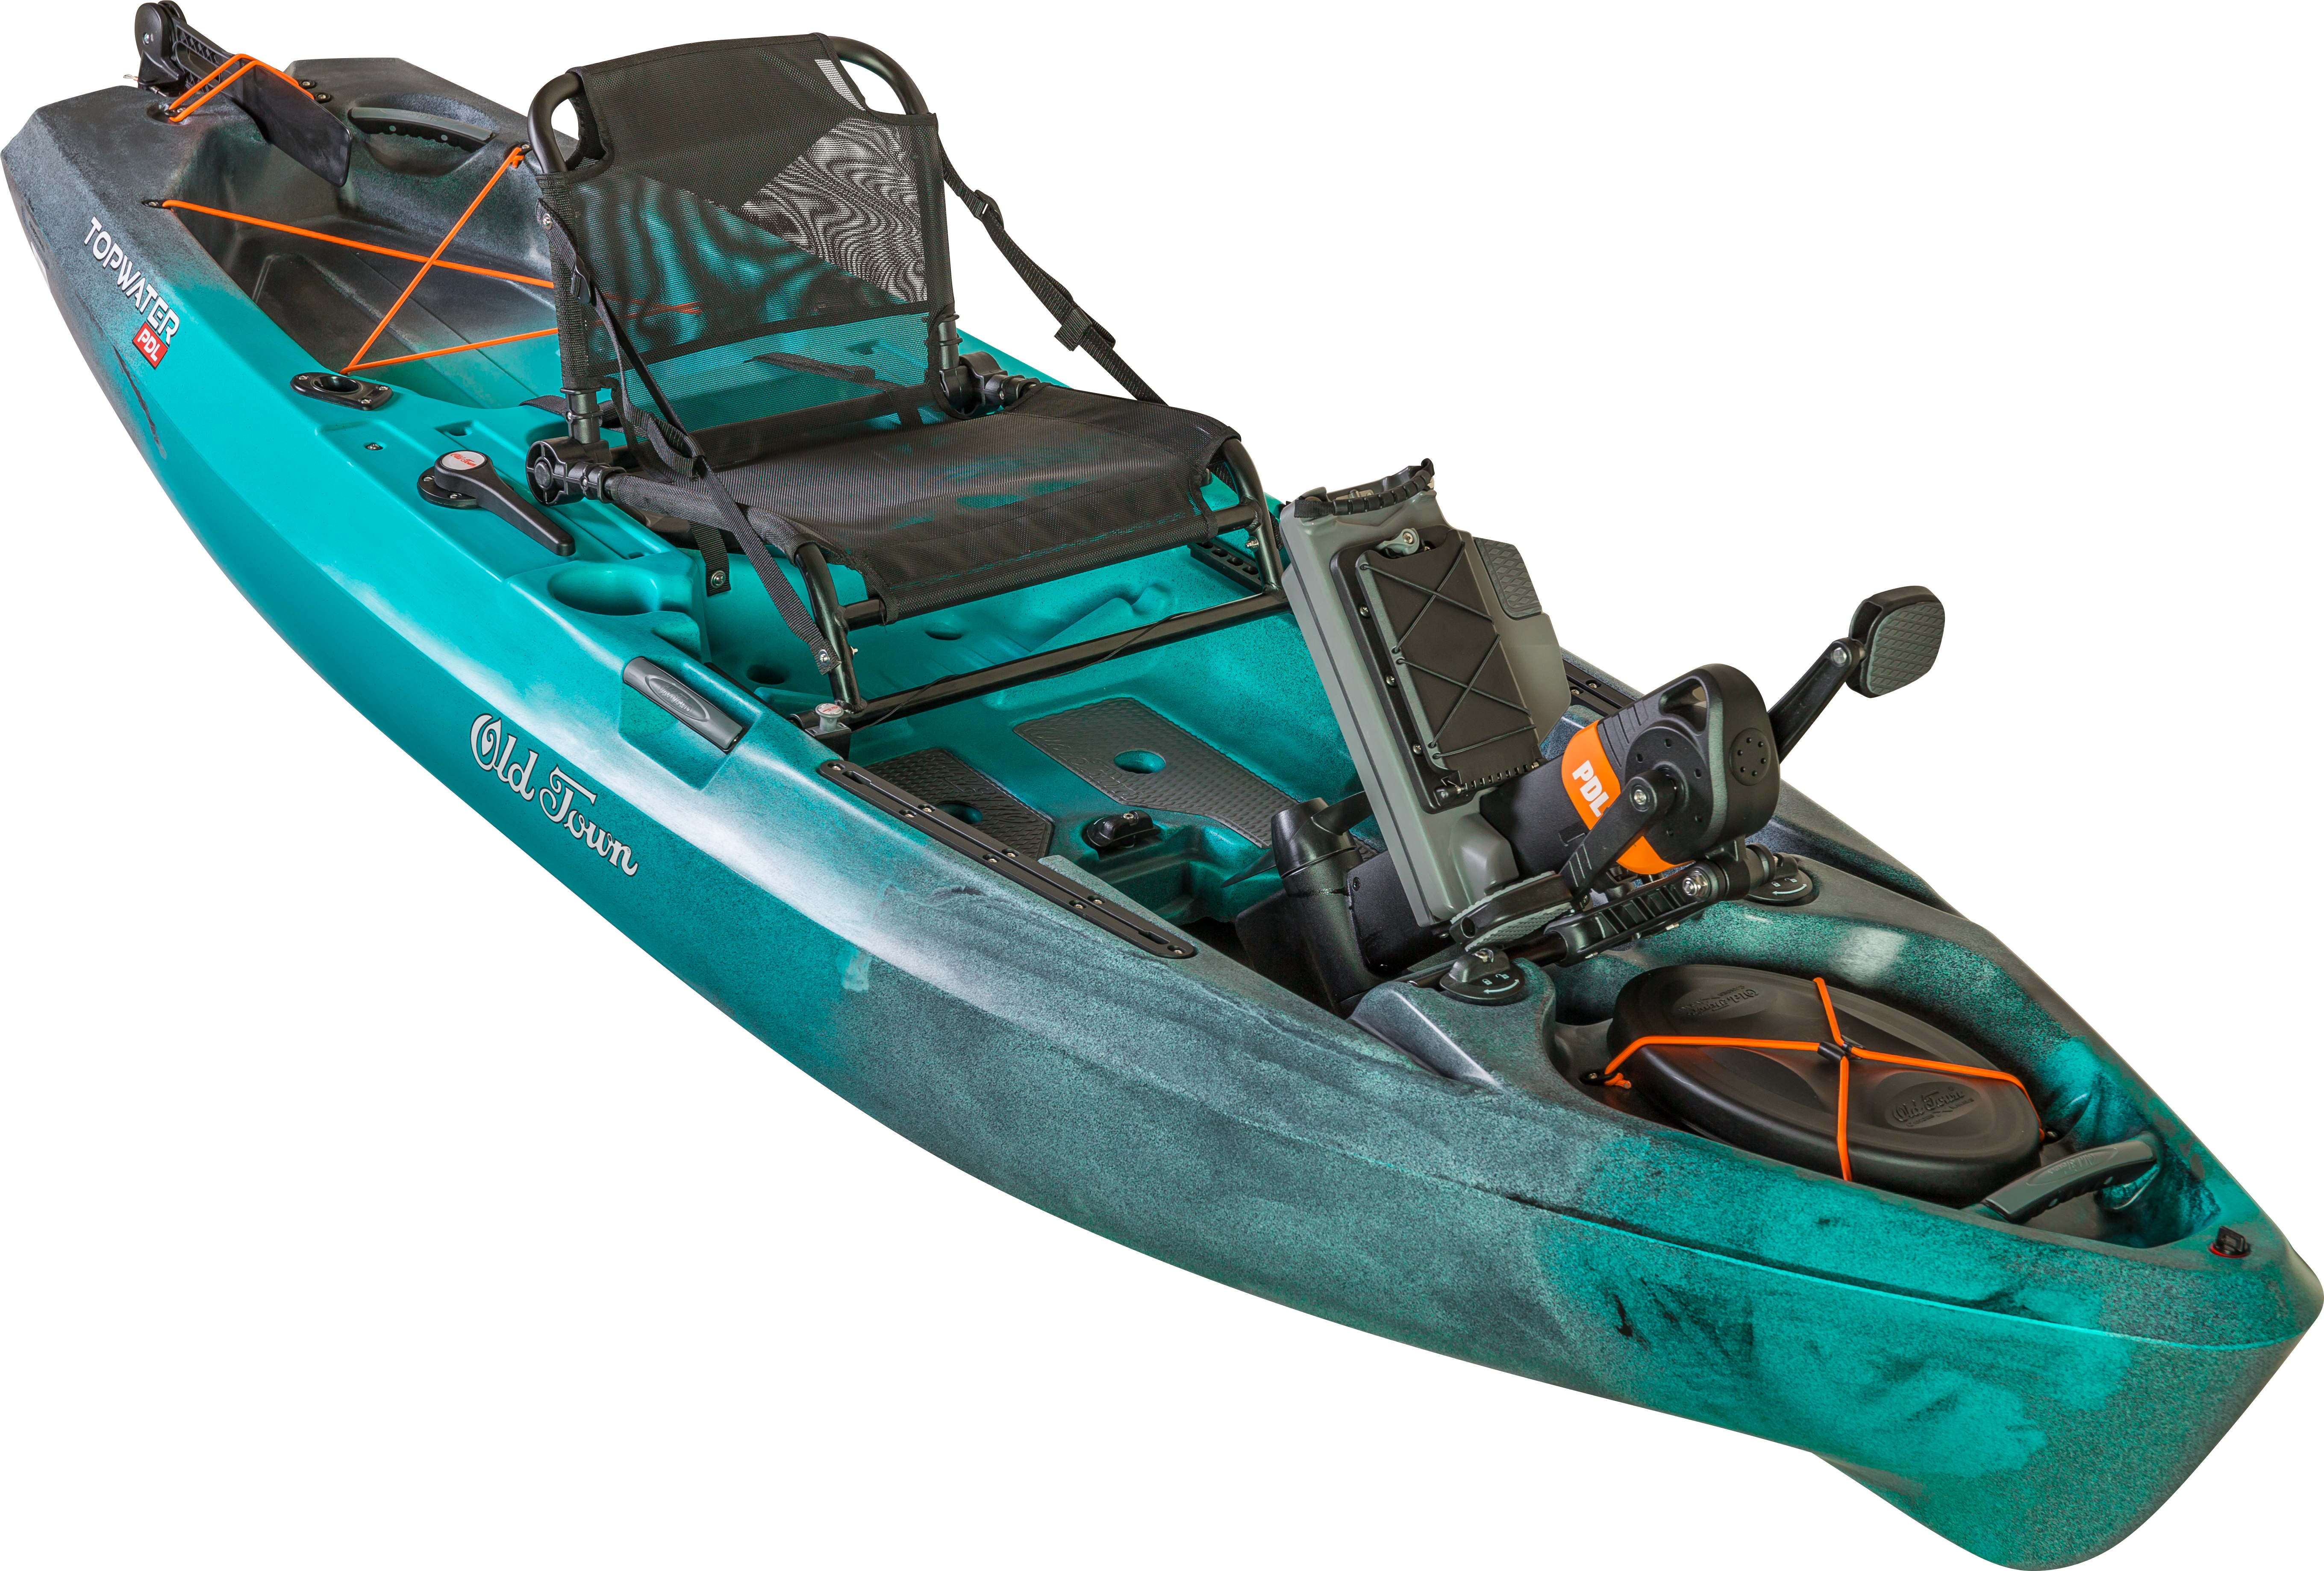 Topwater PDL<BR>
Old Town<BR>
$1,999<BR>
The Topwater PDL offers large fishing kayak performance in a compact, lightweight, nimble packageâ¦ with up to 450-pound capacity. 10 1/2 feet long, 36 inches wide and only 100 pounds fully outfitted.

 <Br><Br>

â¢             DoubleU Hull for precision handling in an ultra-stable, compact,  easy-to-transport size. Sneak up on fish in the quietest pontoon-style hull on the market.
<Br>
â¢             Maintenance-free, award-winning, forward/reverse PDL Drive with patent-pending easy-docking system and industryâs best warranty.
<Br>
â¢             Finally, a revolutionary universal transducer mounting system for simple fish finder installation.

<Br>â¢             Ultra-comfortable & breathable ElementAir seat with high/low positioning.
<Br>
â¢             Oversized stern tank well coupled w/ impressive hull capacity for one of the roomiest fishing kayaks on the market.
<Br>
â¢             Stay organized & easily access gear w/ two flush mount rod holders and thoughtfully-placed onboard rod and tackle storage.
<Br>
â¢             EVA foam deck pads for traction and all-day stand-up fishing comfort.
